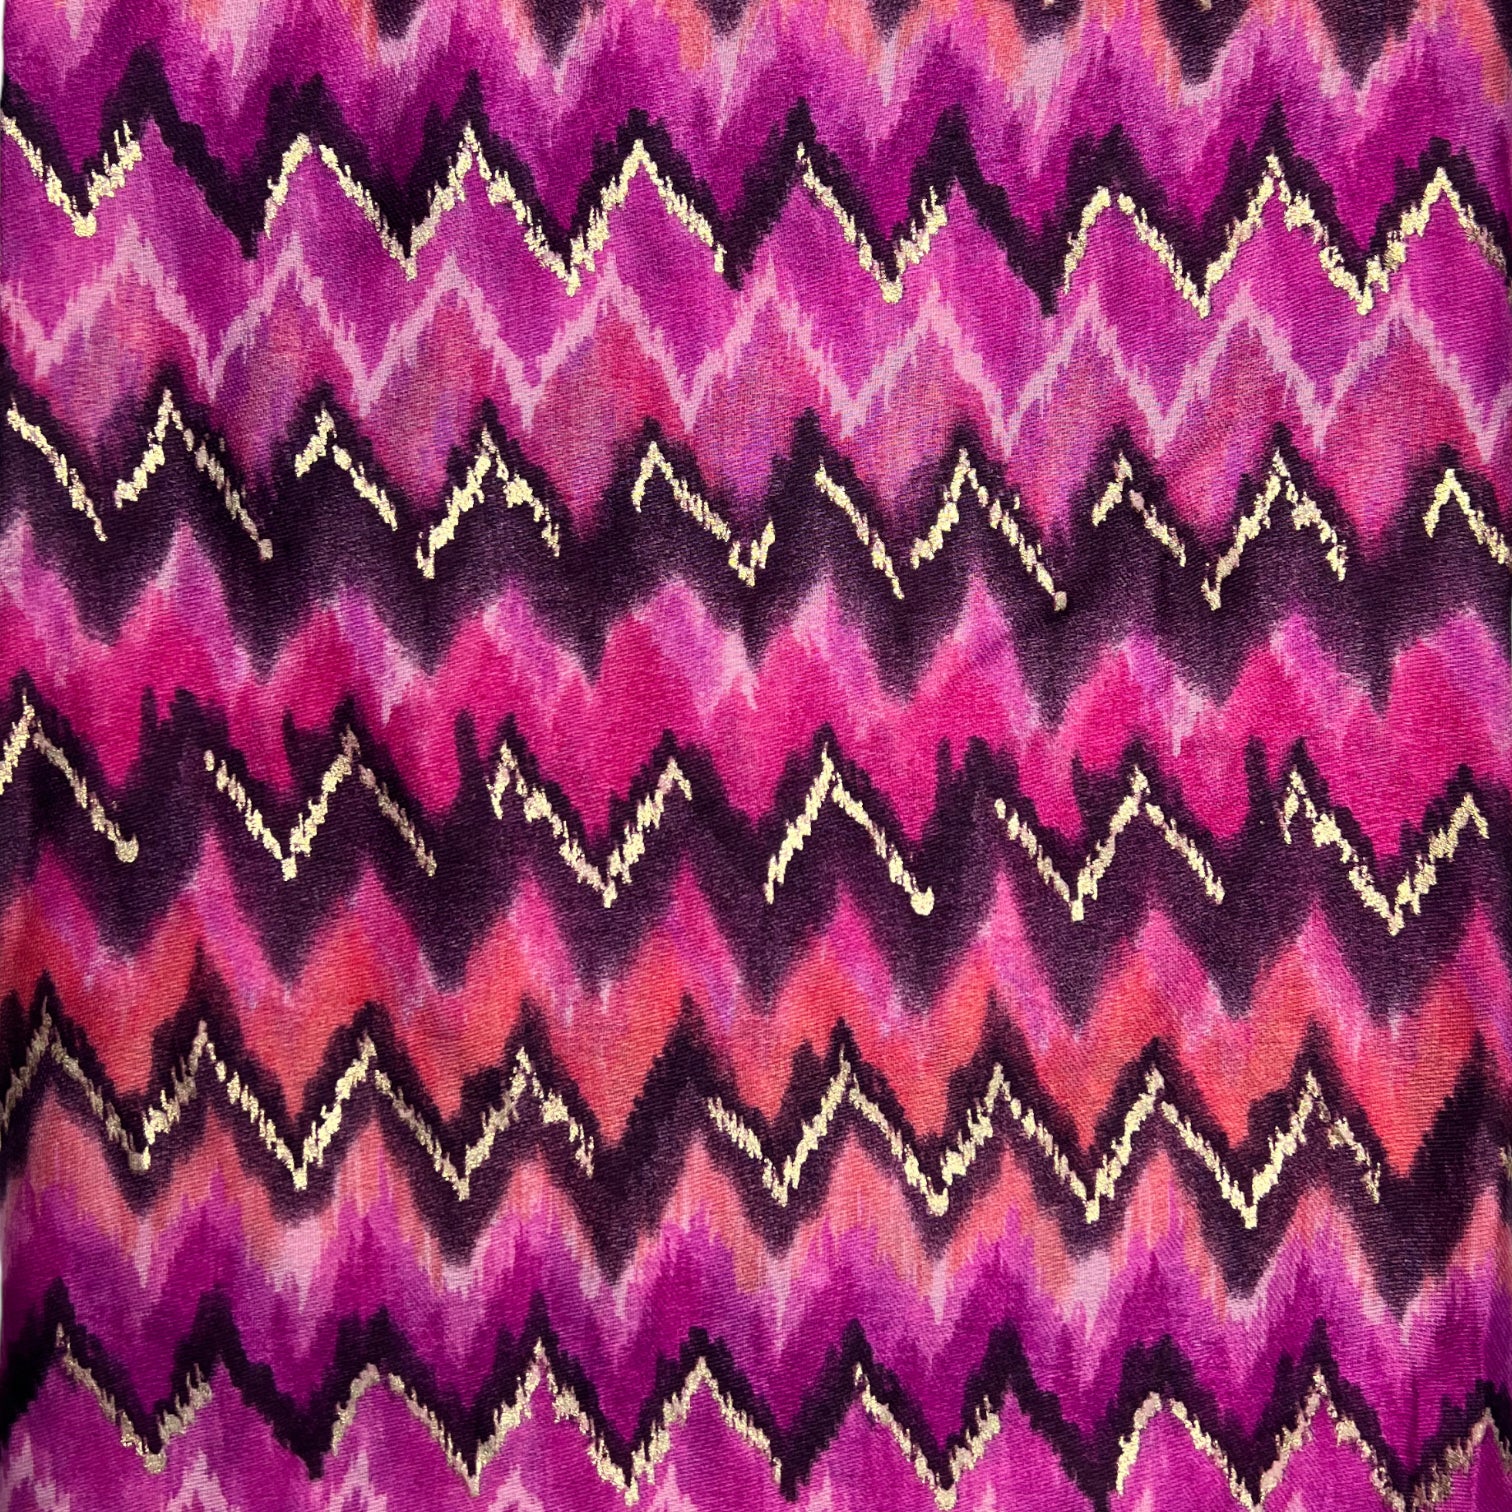 This beautiful scarf is crafted from a cotton blend fabric, featuring a stunning wave pattern in hot pink. The fringed ends and vibrant colour add a stylish accent to any outfit.      L: 180cm x W: 90cm  60% Cotton and 40% Recycled Viscose